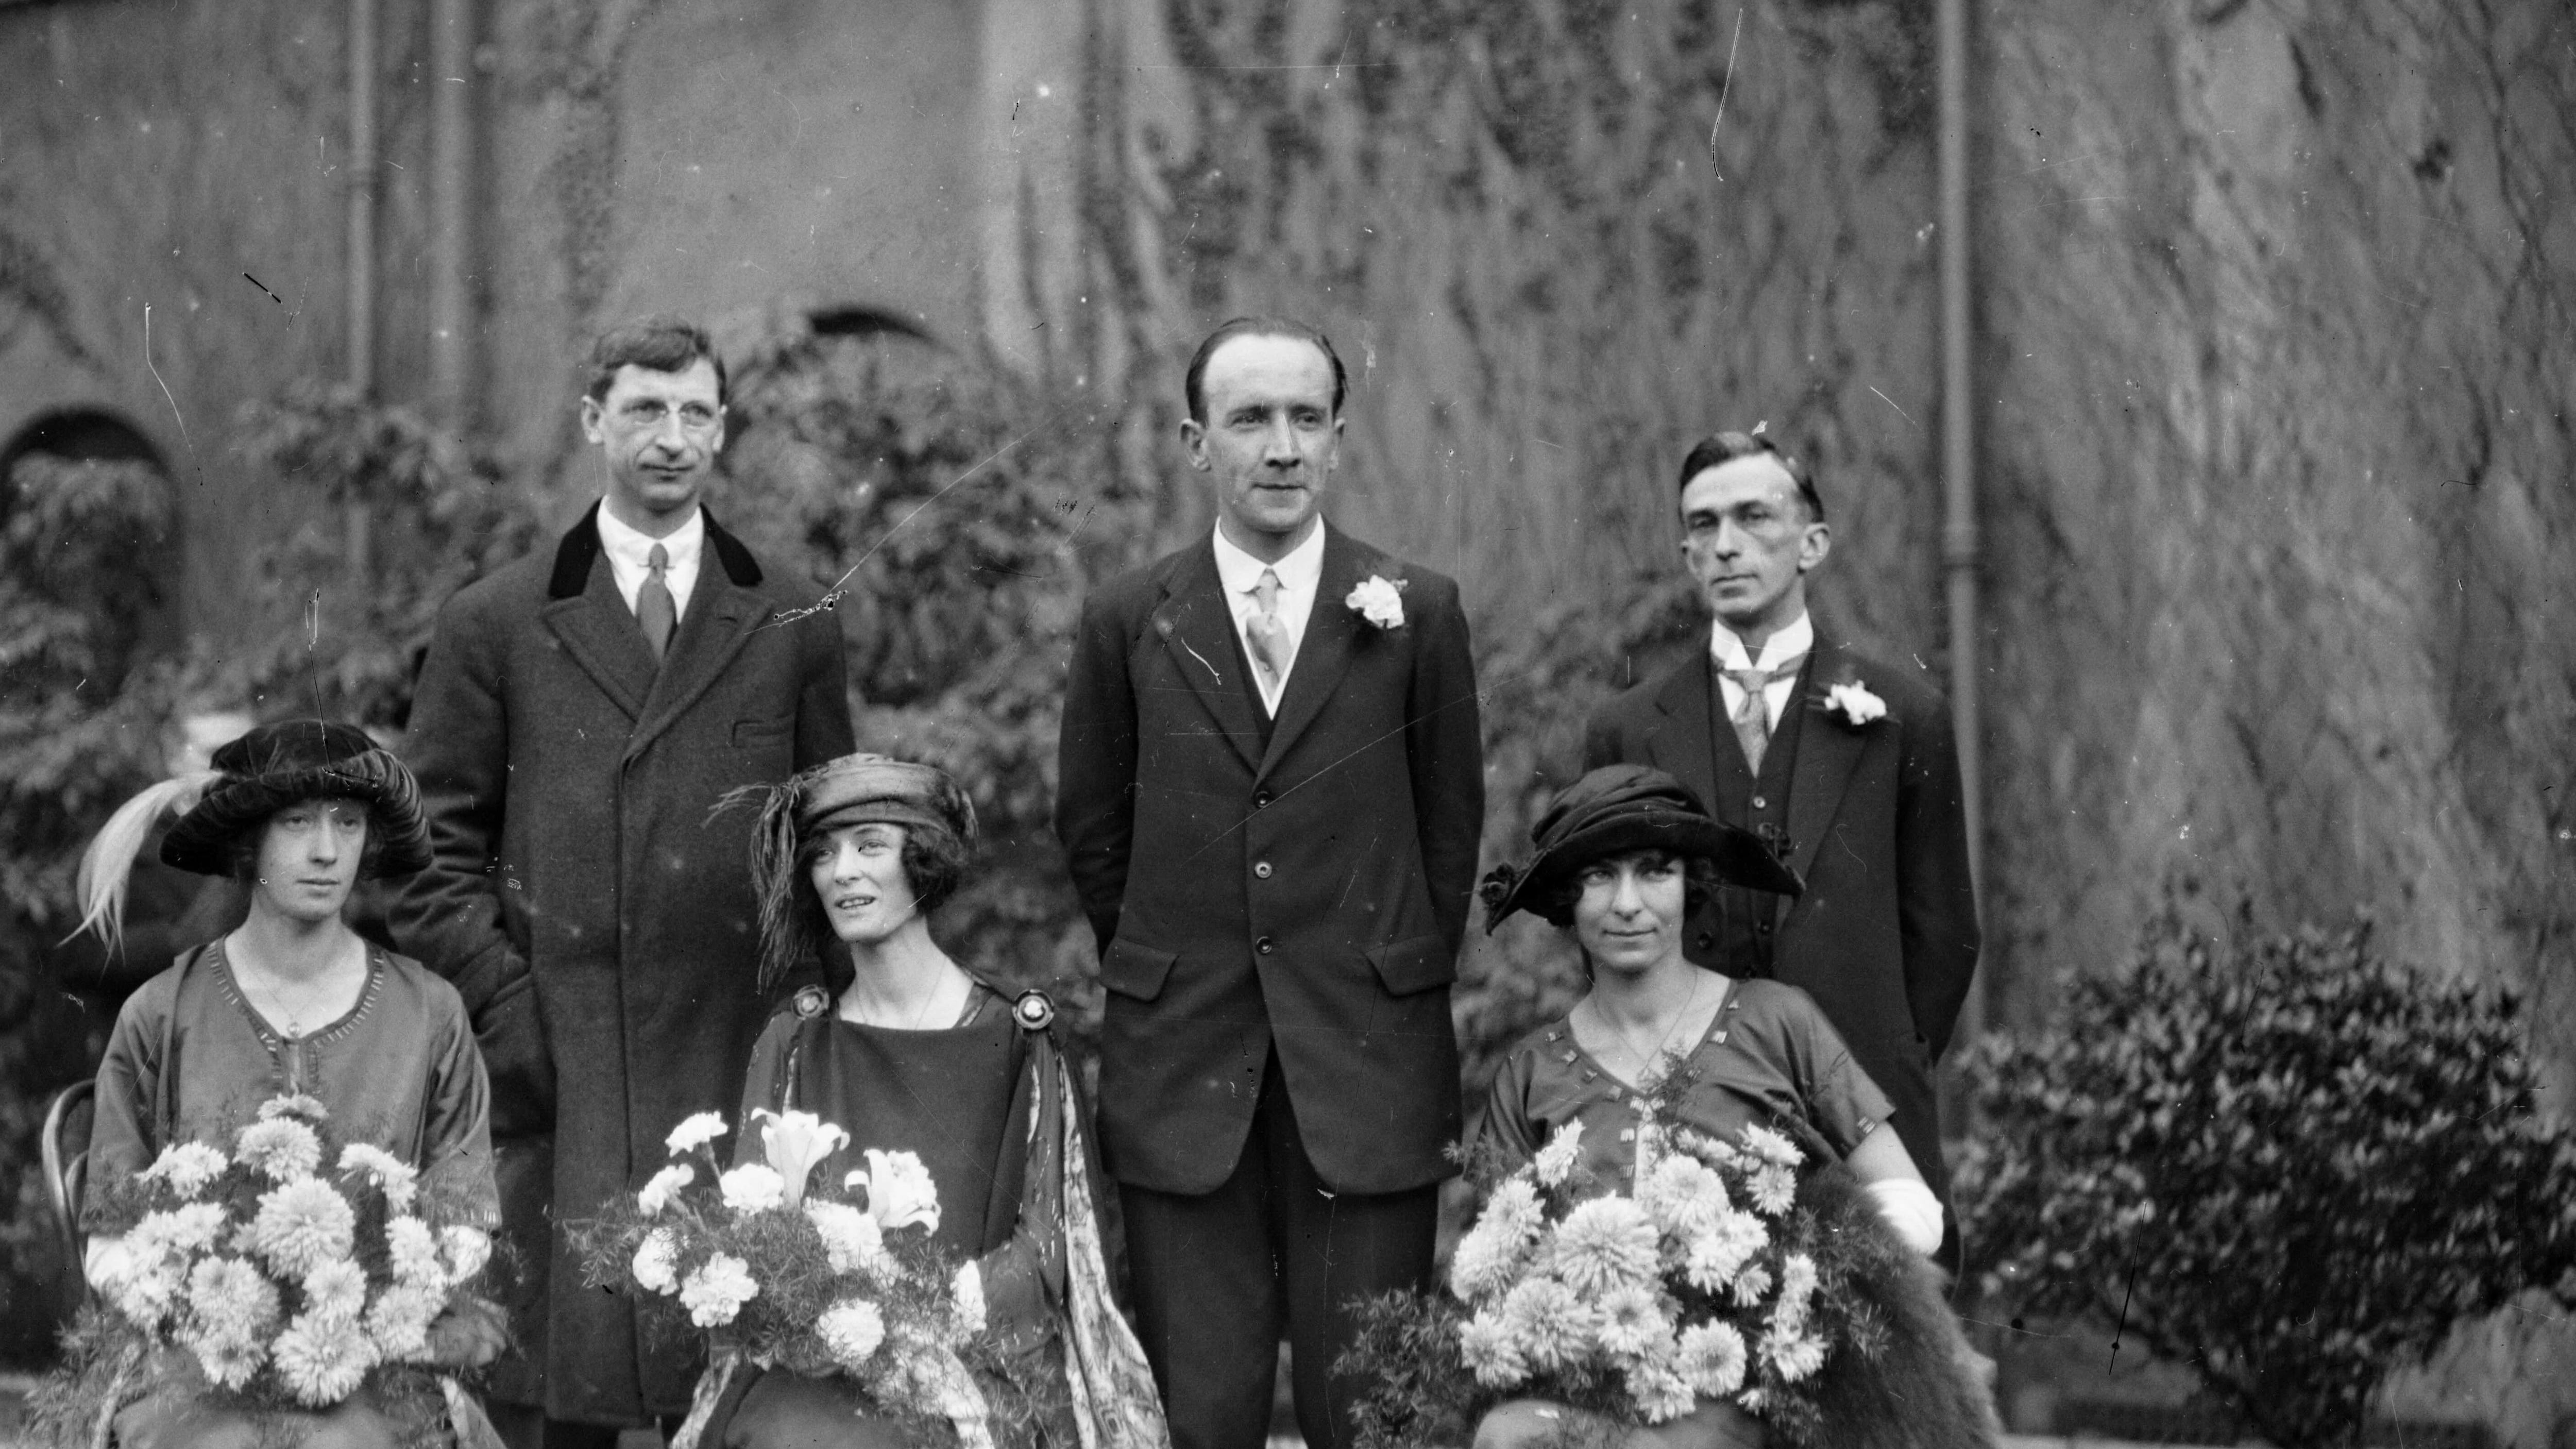 Birdie and Kevin O'Higgins's wedding day, November 1921. Éamon de Valera and best man Rory O’Connor flank the groom. Just over a year later O’Higgins would reluctantly agree to Rory’s execution. (Courtesy of the National Library of Ireland)